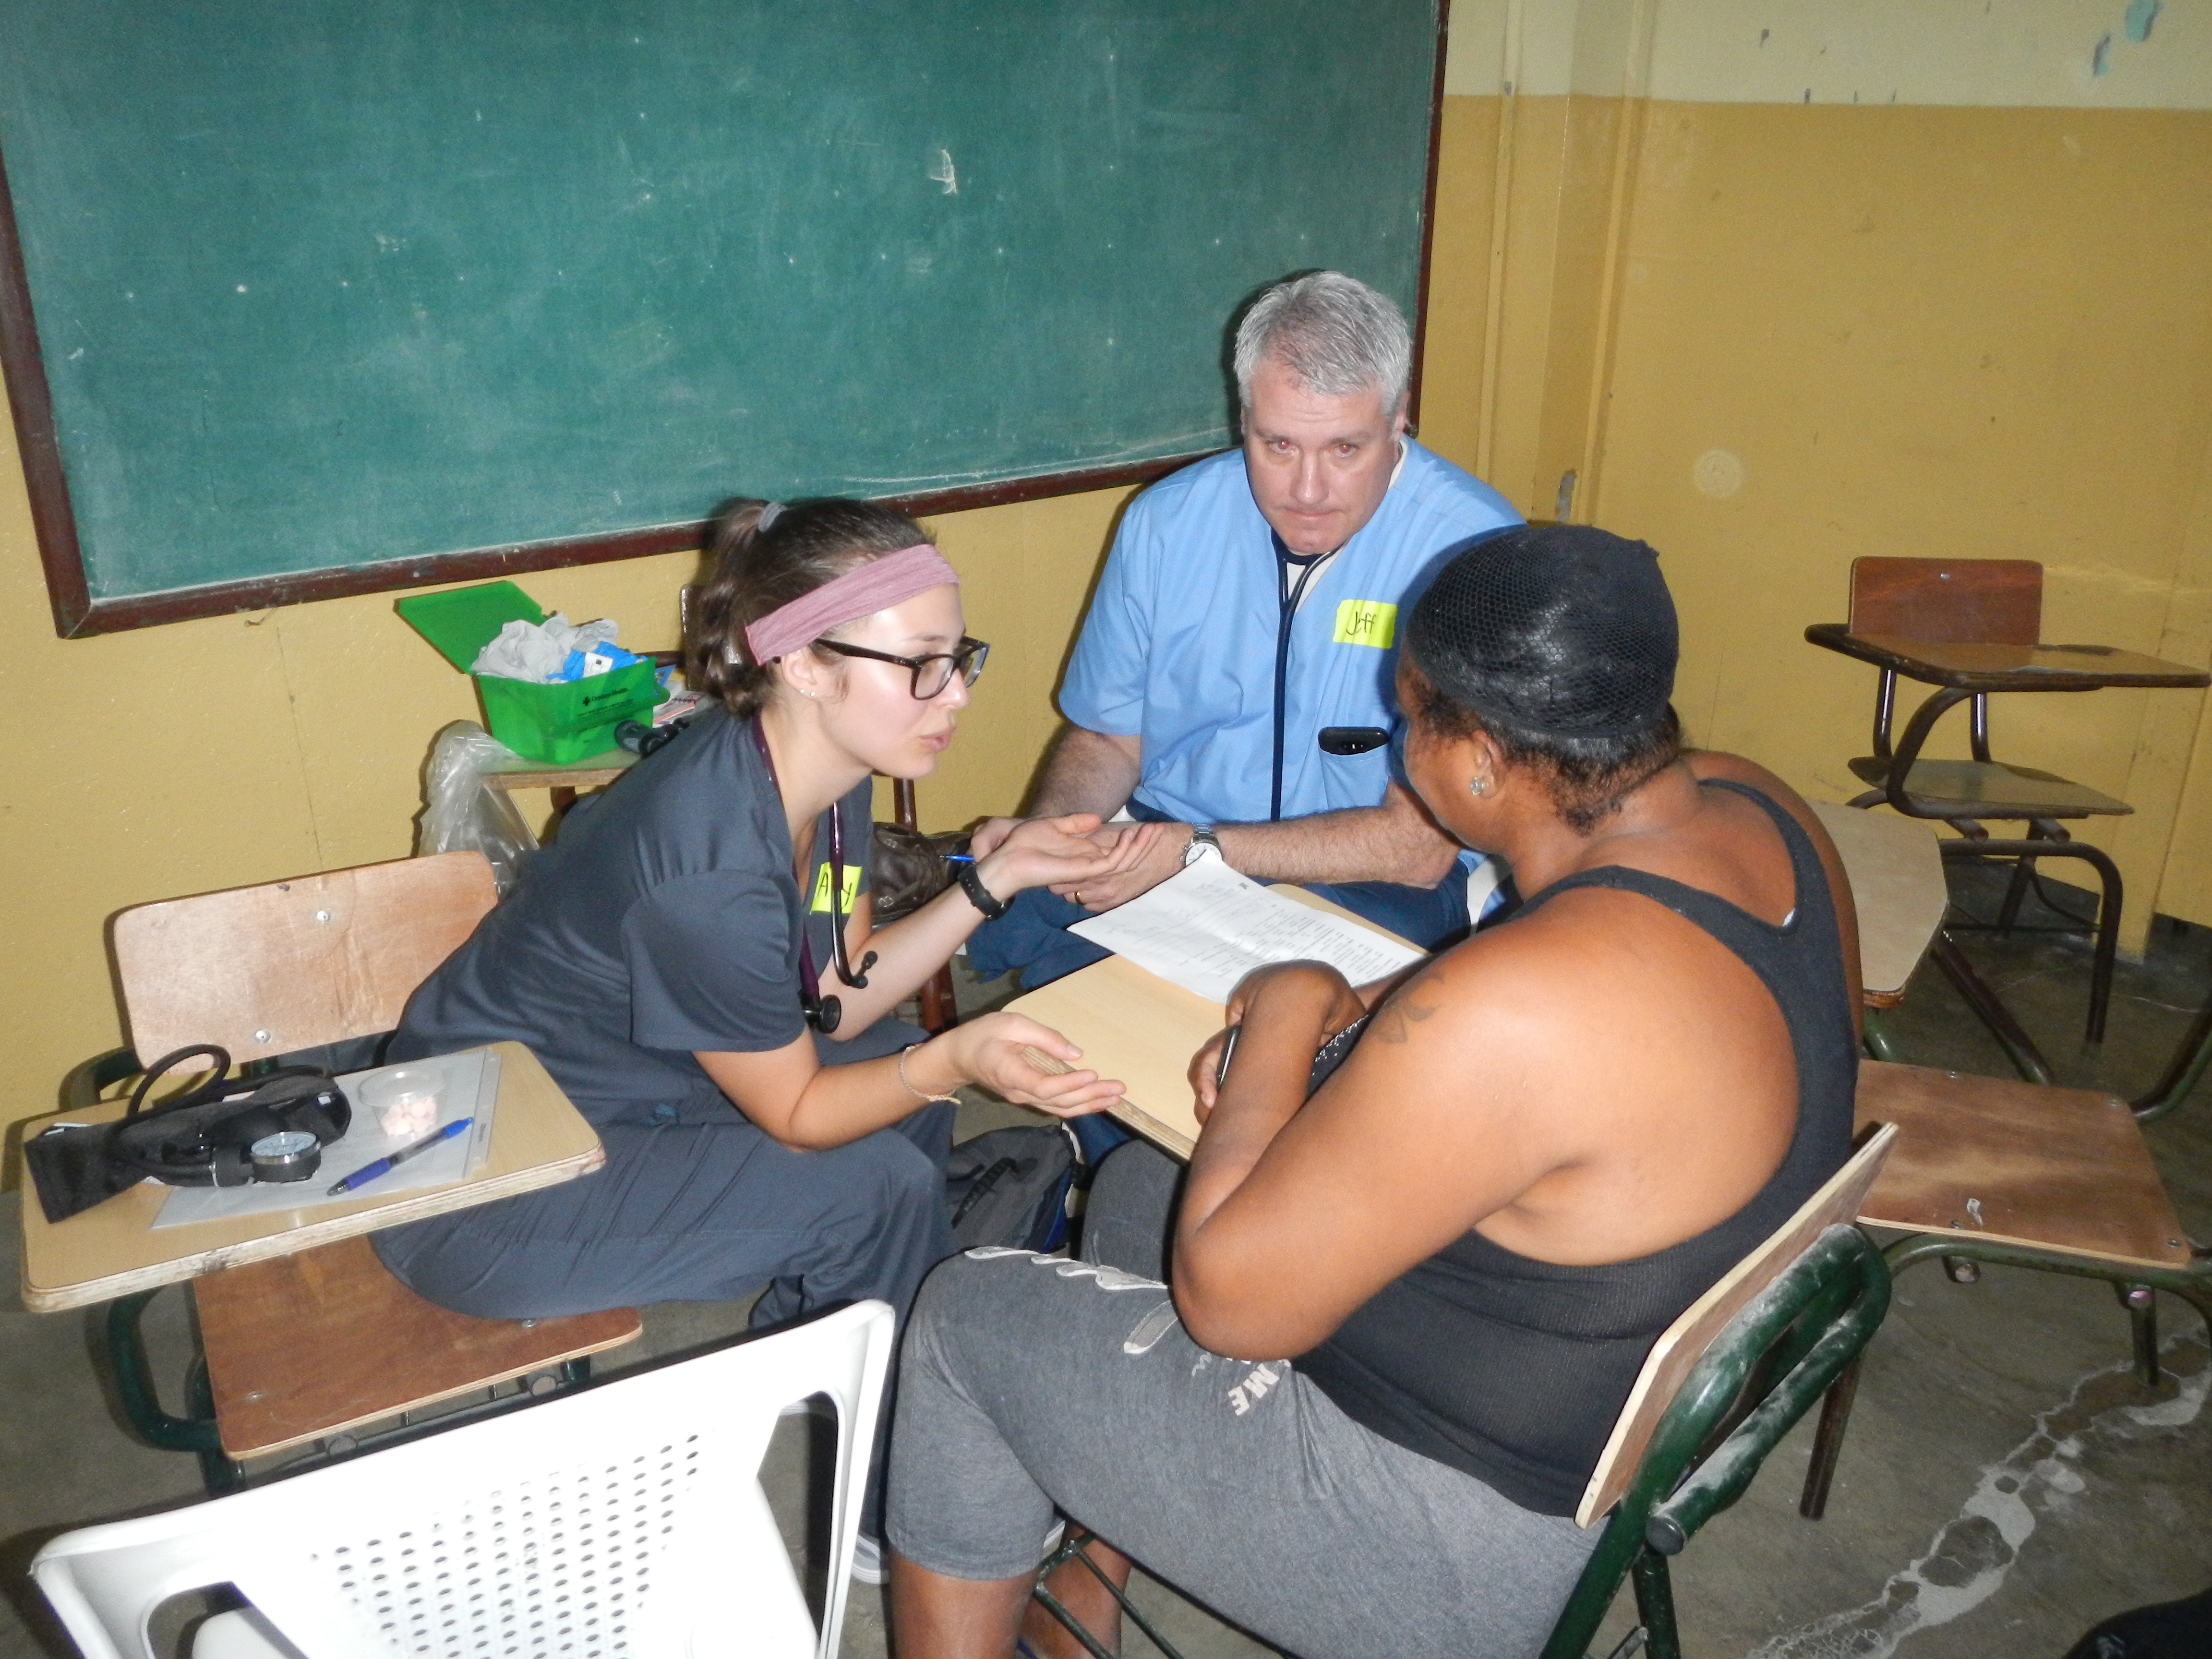 Faculty and students talk with a patient in the Dominican Republic